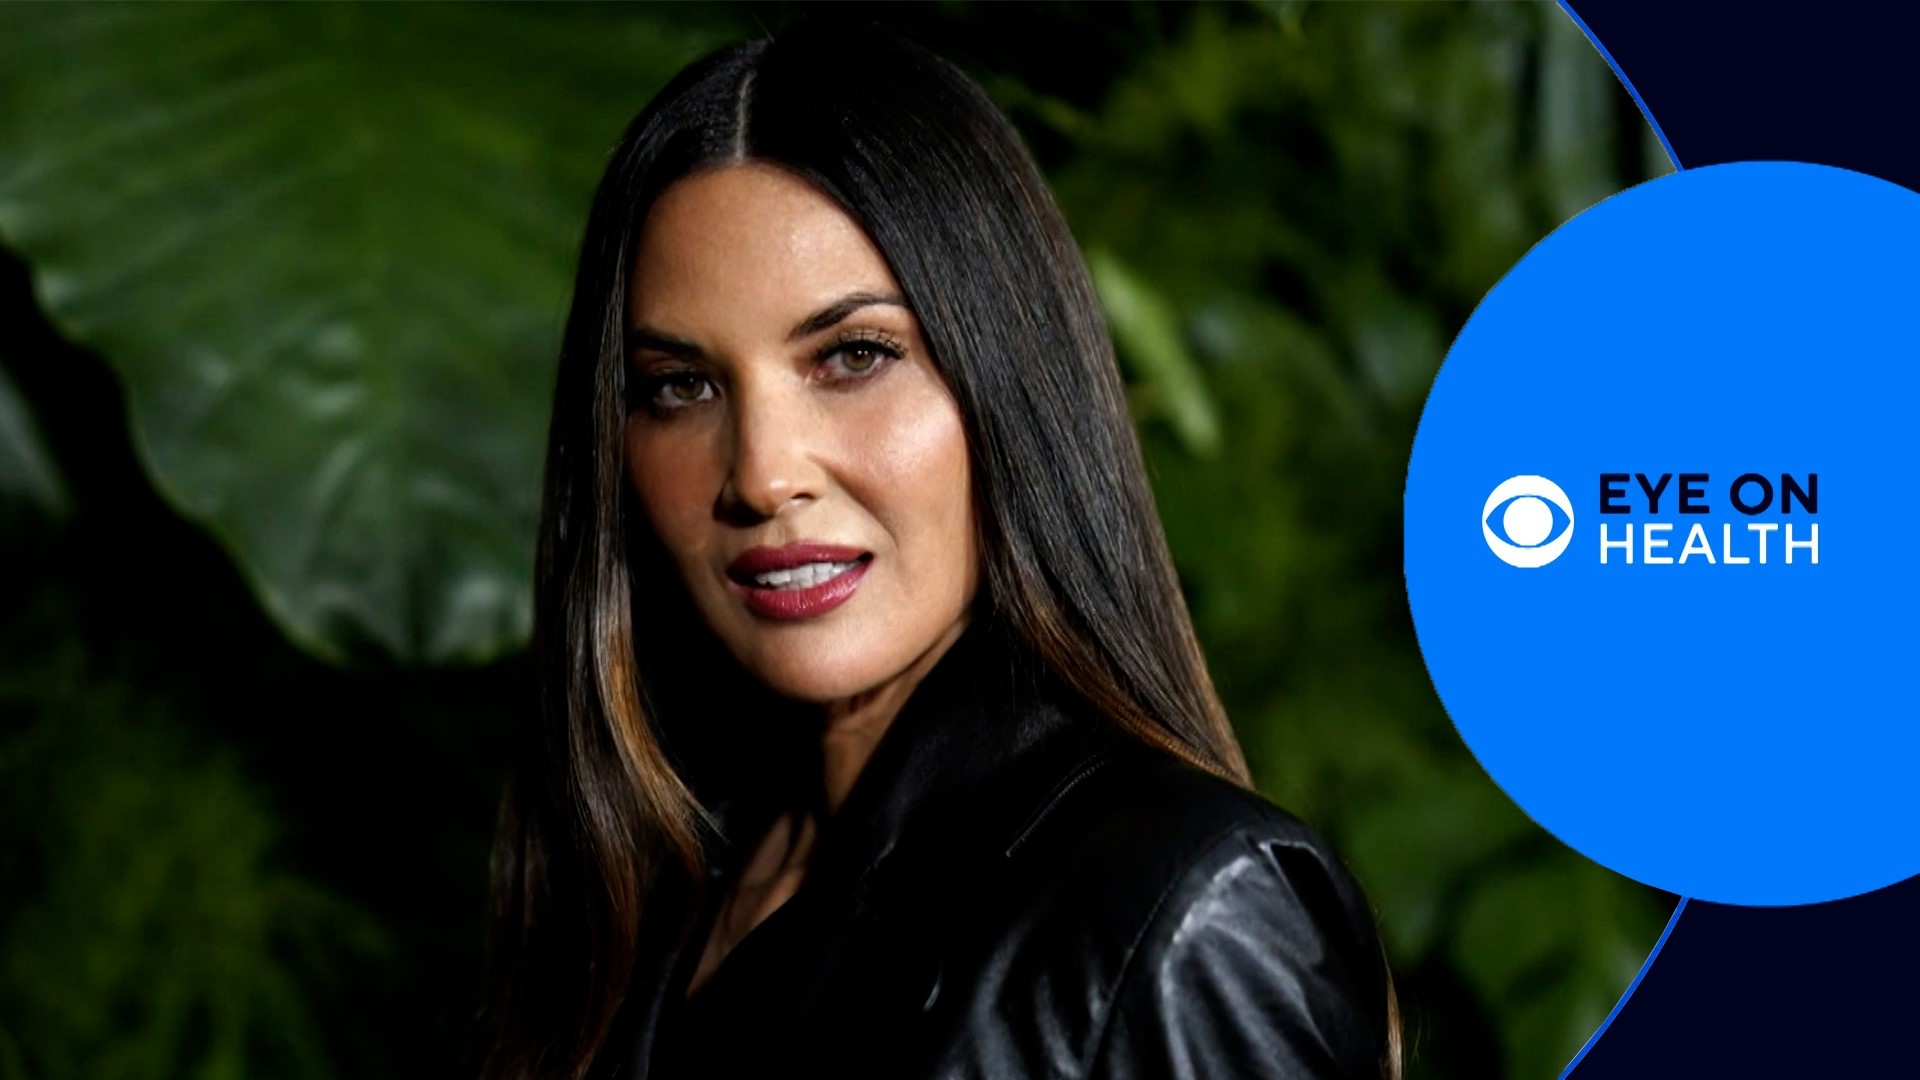 Eye on Health takes a look at the health stories that make news during the week. This week we look at Olivia Munn's breast cancer diagnosis and more.